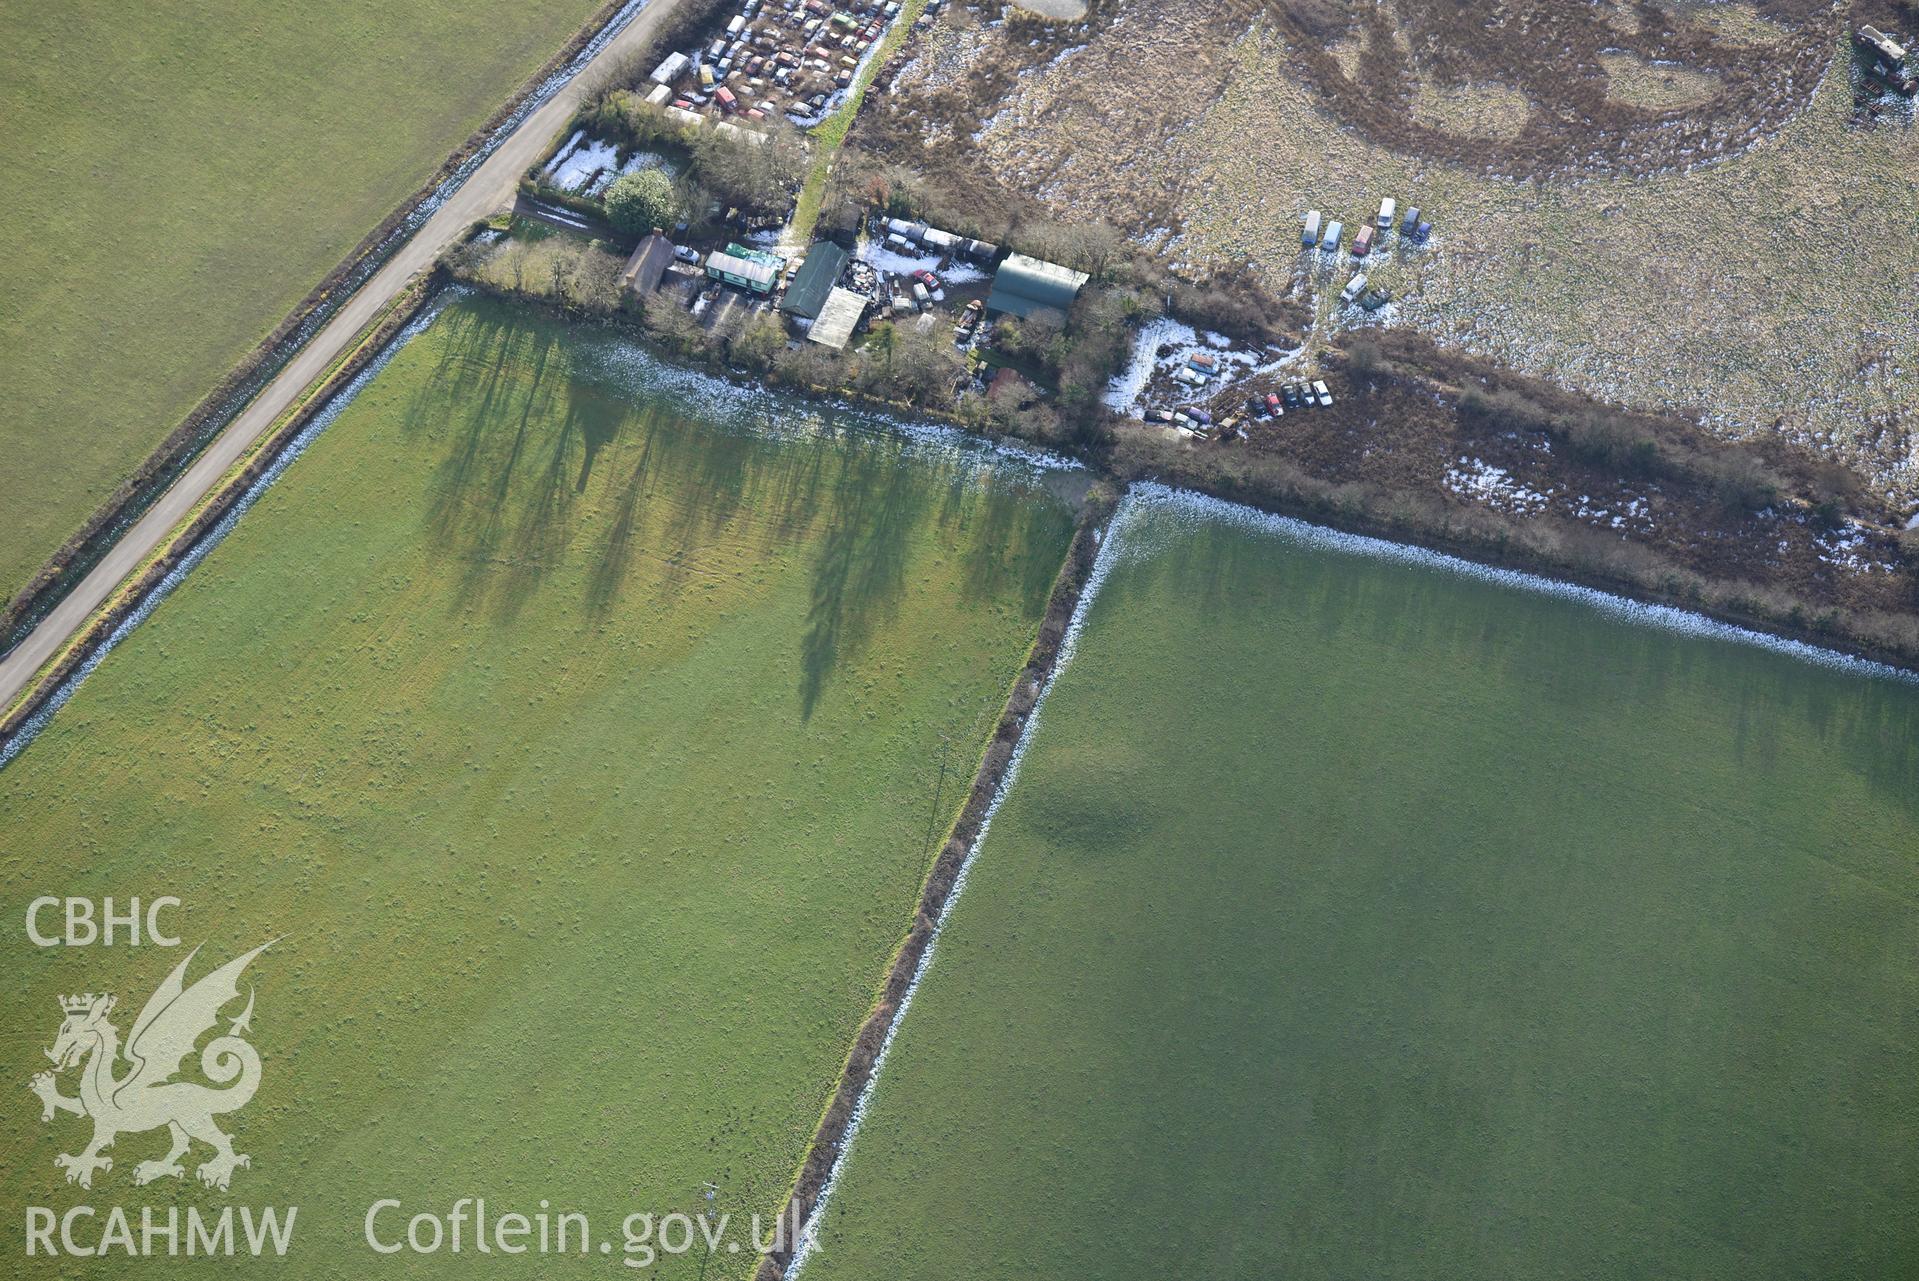 Pant y Menyn round barrow on the southern outskirts of Glandy Cross, near Narberth. Oblique aerial photograph taken during the Royal Commission's programme of archaeological aerial reconnaissance by Toby Driver on 4th February 2015.